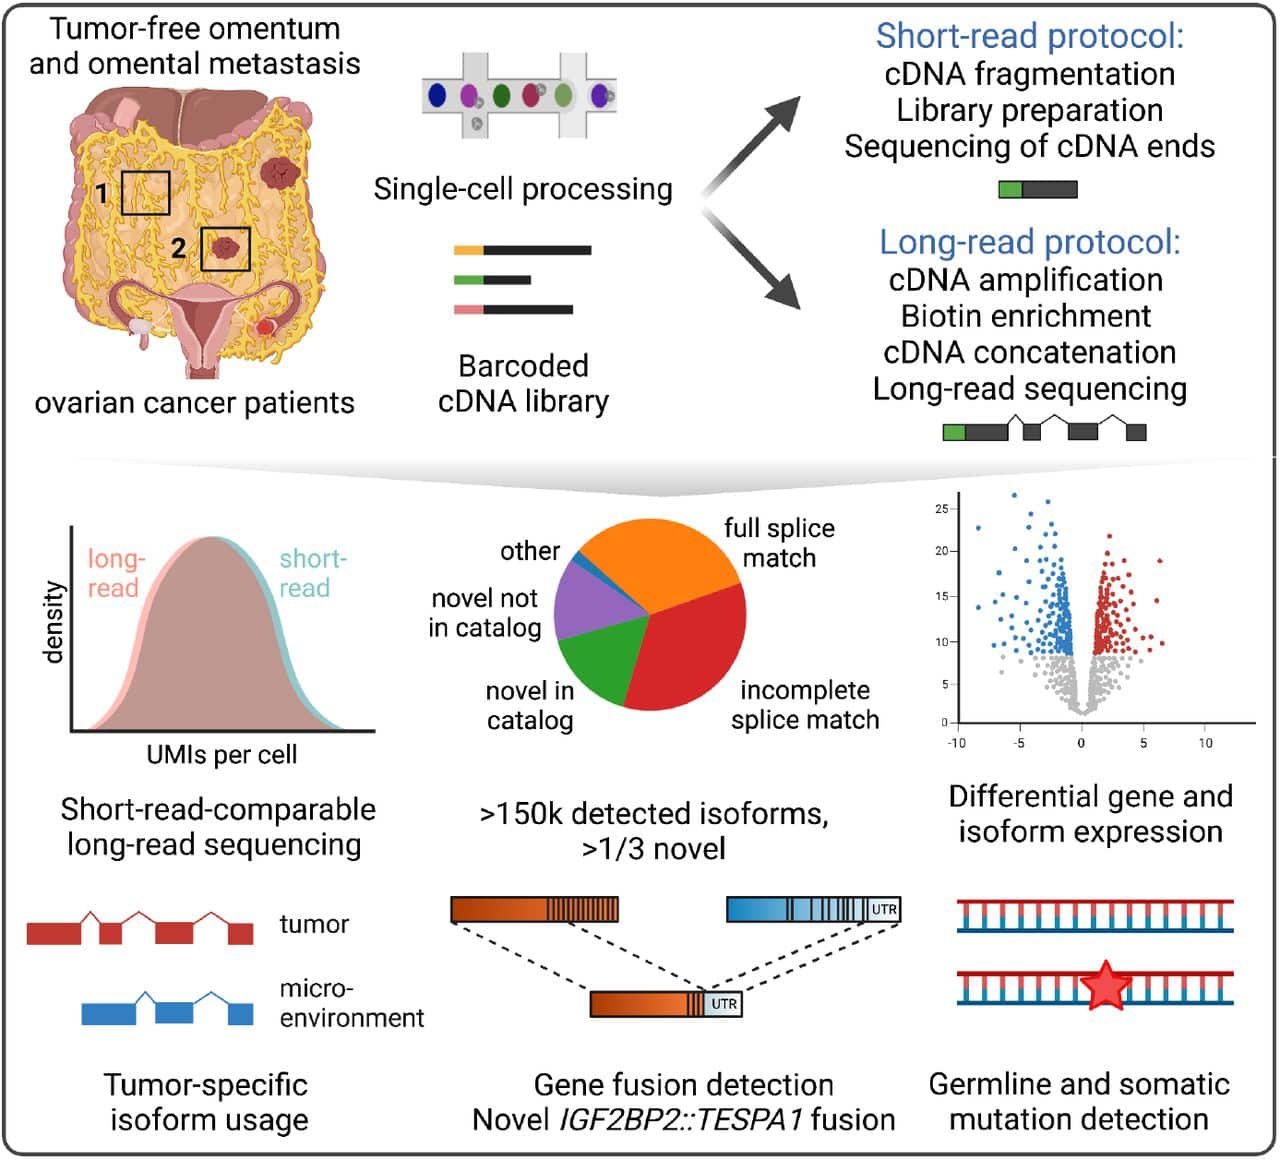 comprehensive long-read isoform analysis platform and sequencing resource for breast cancer